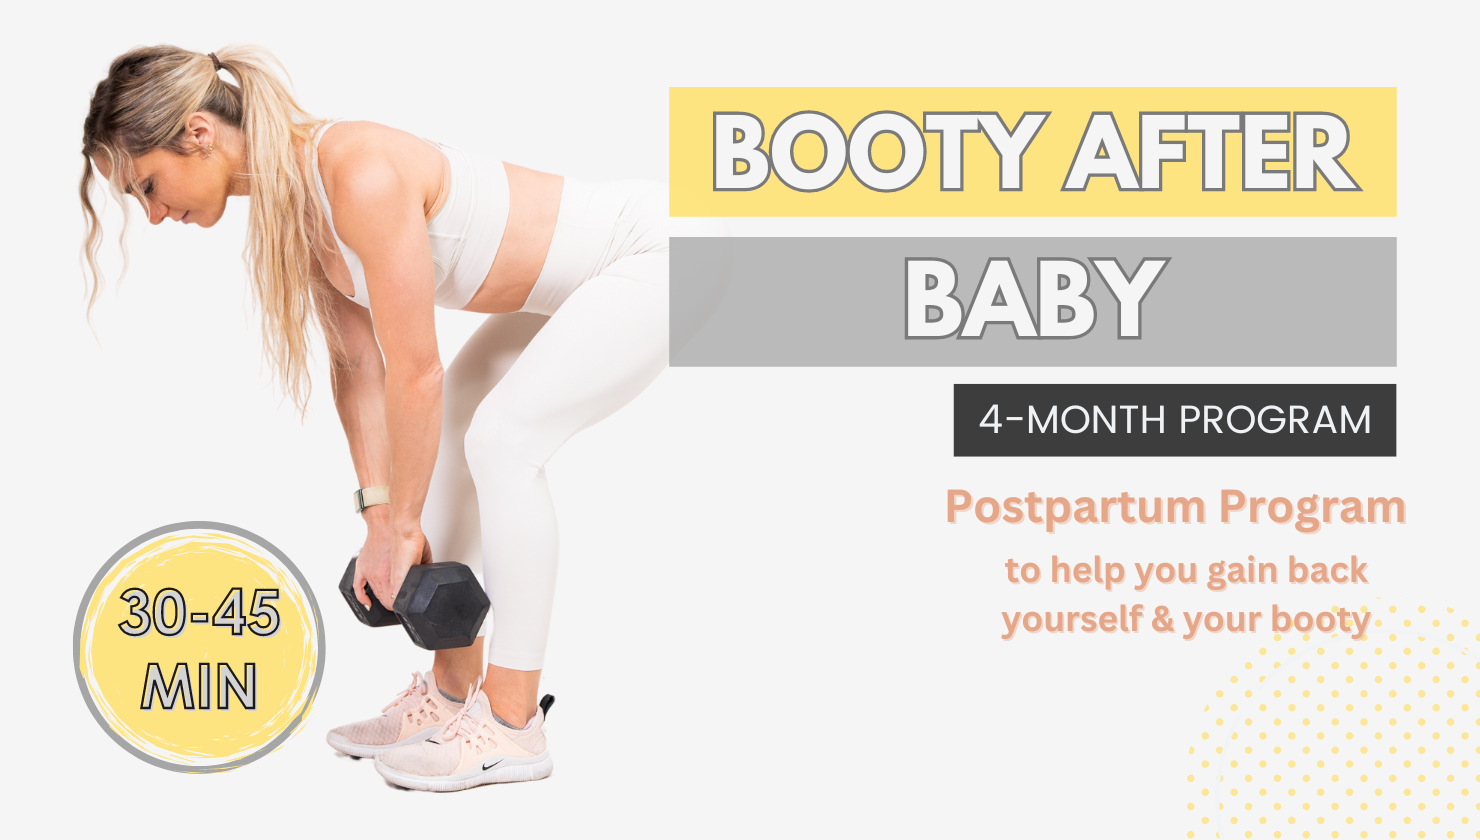 Apple Fitness+ Pregnancy Workout for Total-Body Strength